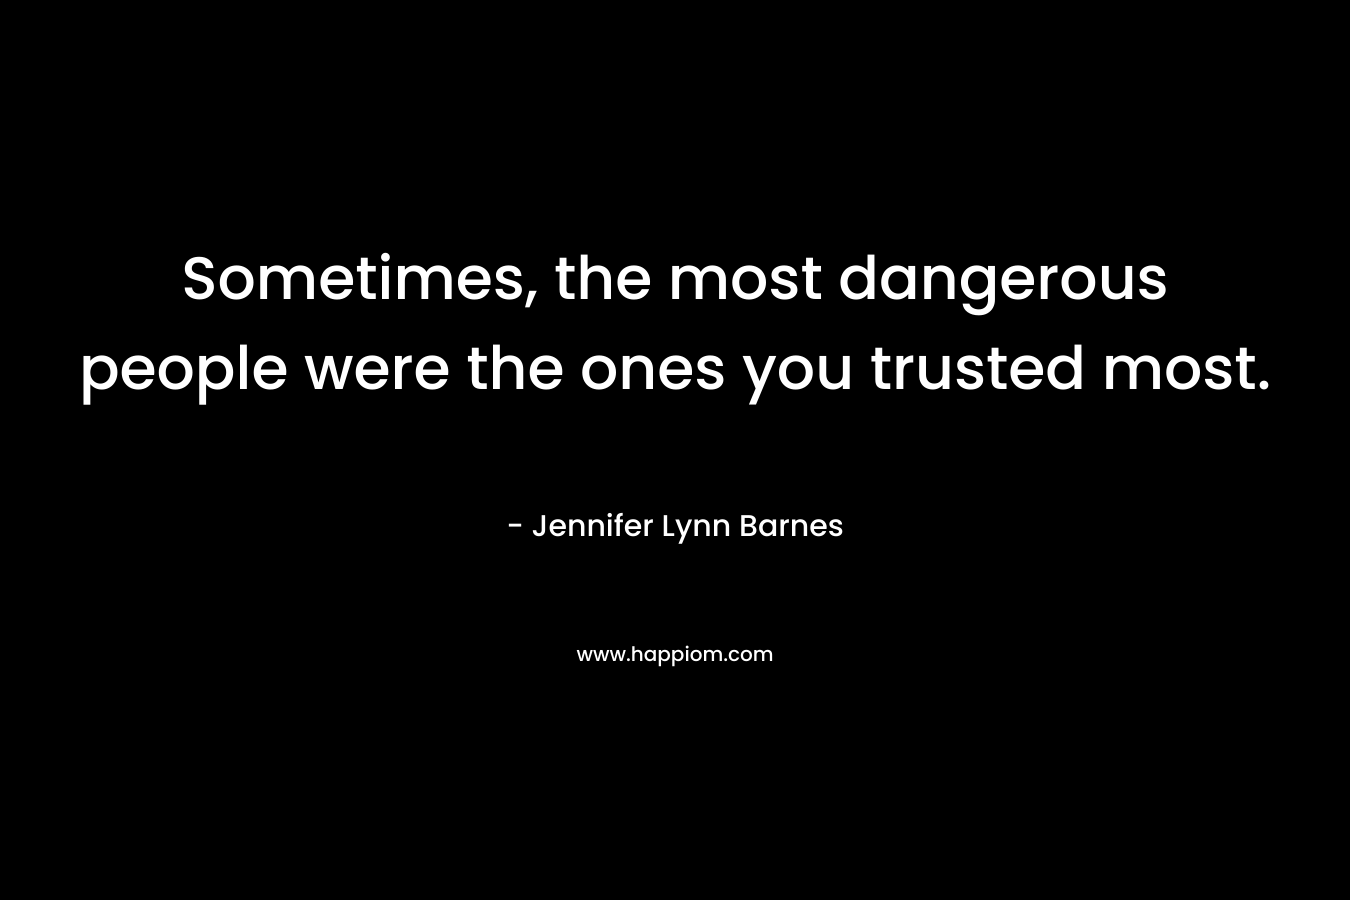 Sometimes, the most dangerous people were the ones you trusted most.